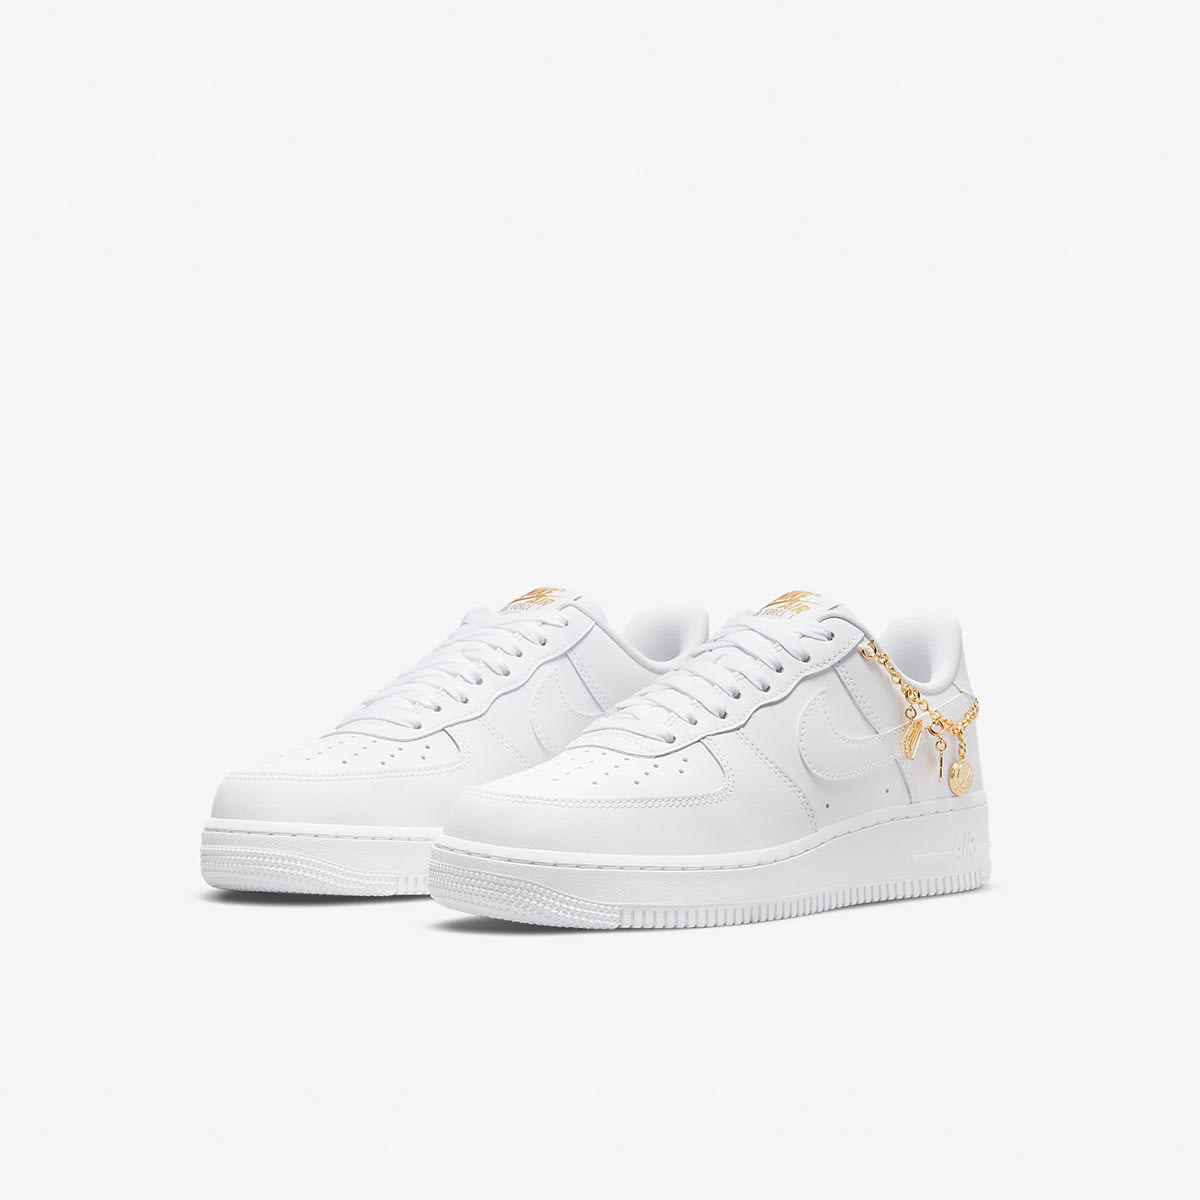 Nike Air Force 1 '07 LX W (White & Gold) | END. Launches